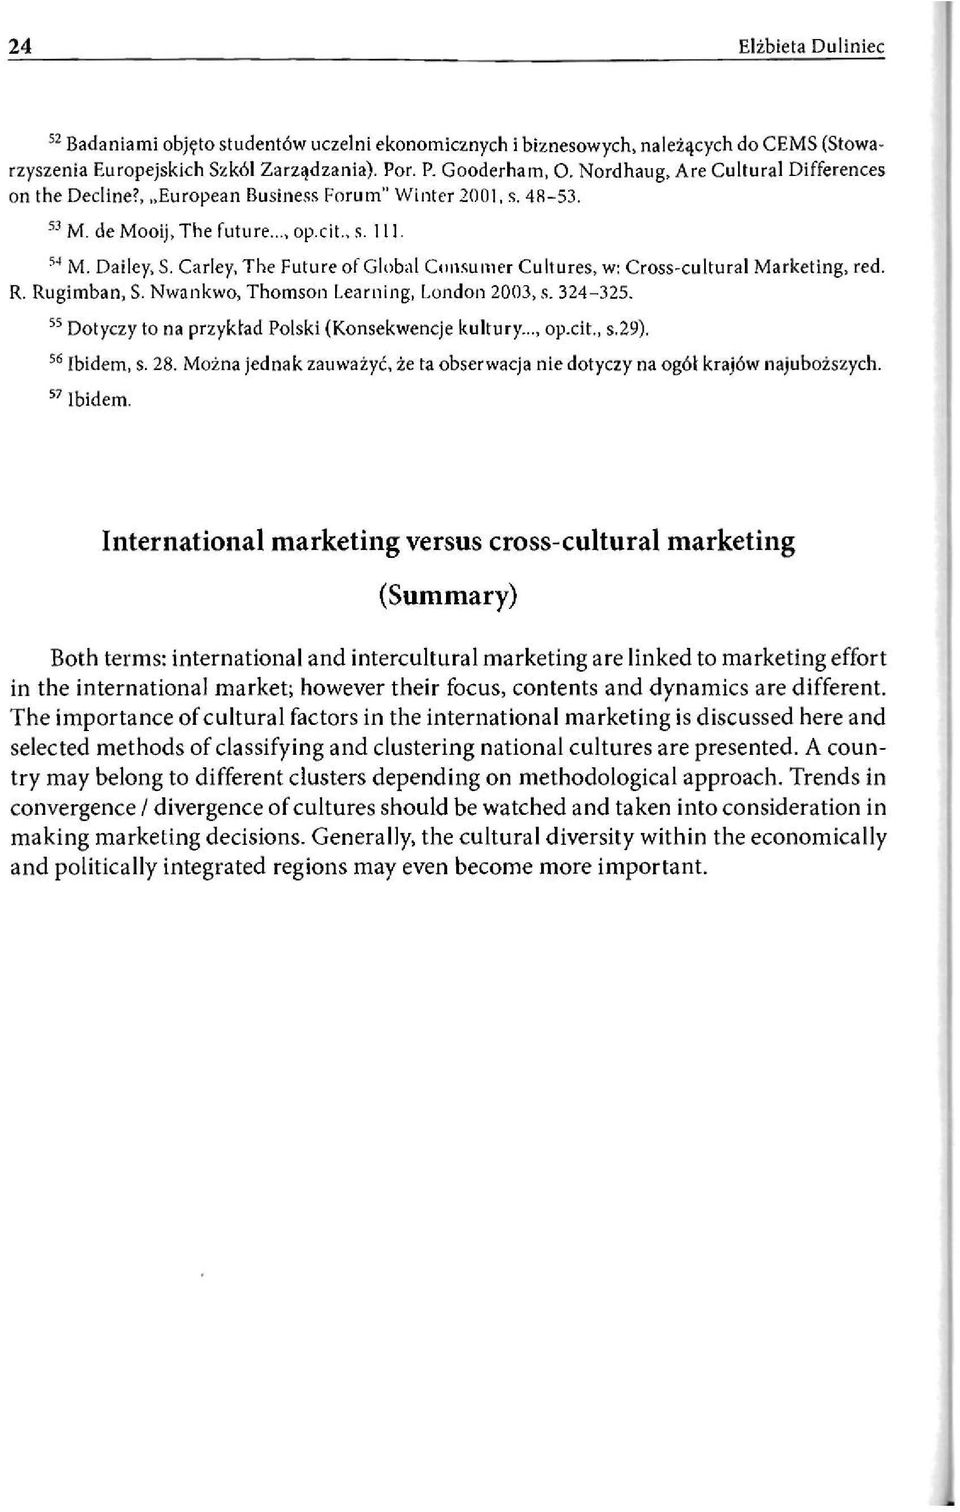 Carley, The Future of Global Consumer Cultures, w: Cross-cultural Marketing, red. R. Rugimban, S. Nwankwo, Thomson Learning, London 2003, s. 324-325.